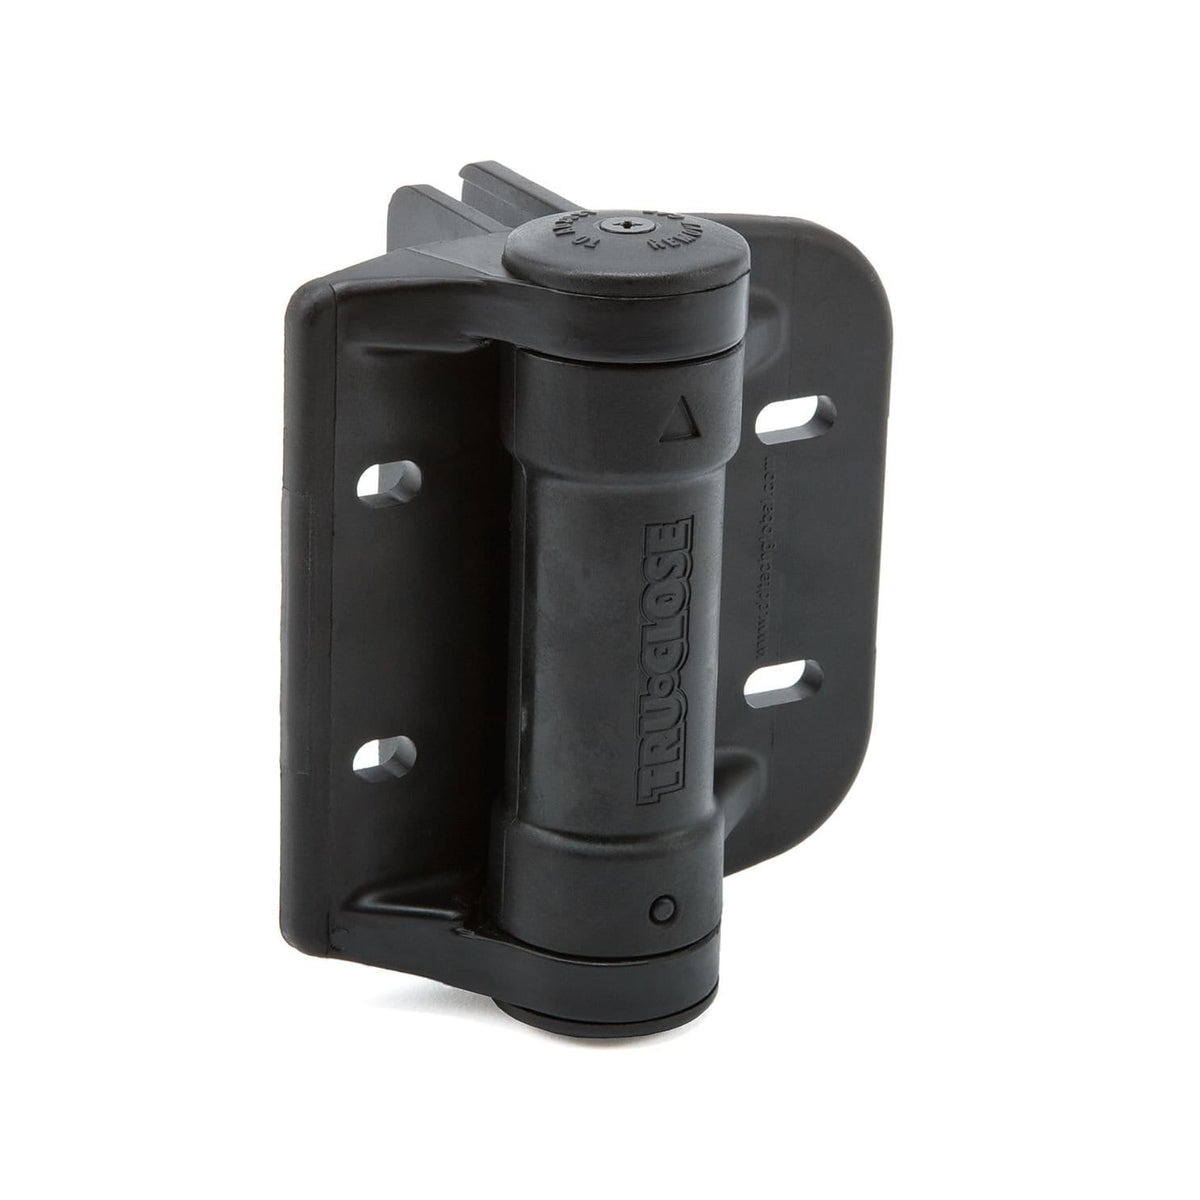 Round Post - Self-Closing Gate Hinges - Gate Gap (5/8&quot; - 1 3/8&quot;) - Black Finish - For Chain Link Fences - 2 Pack